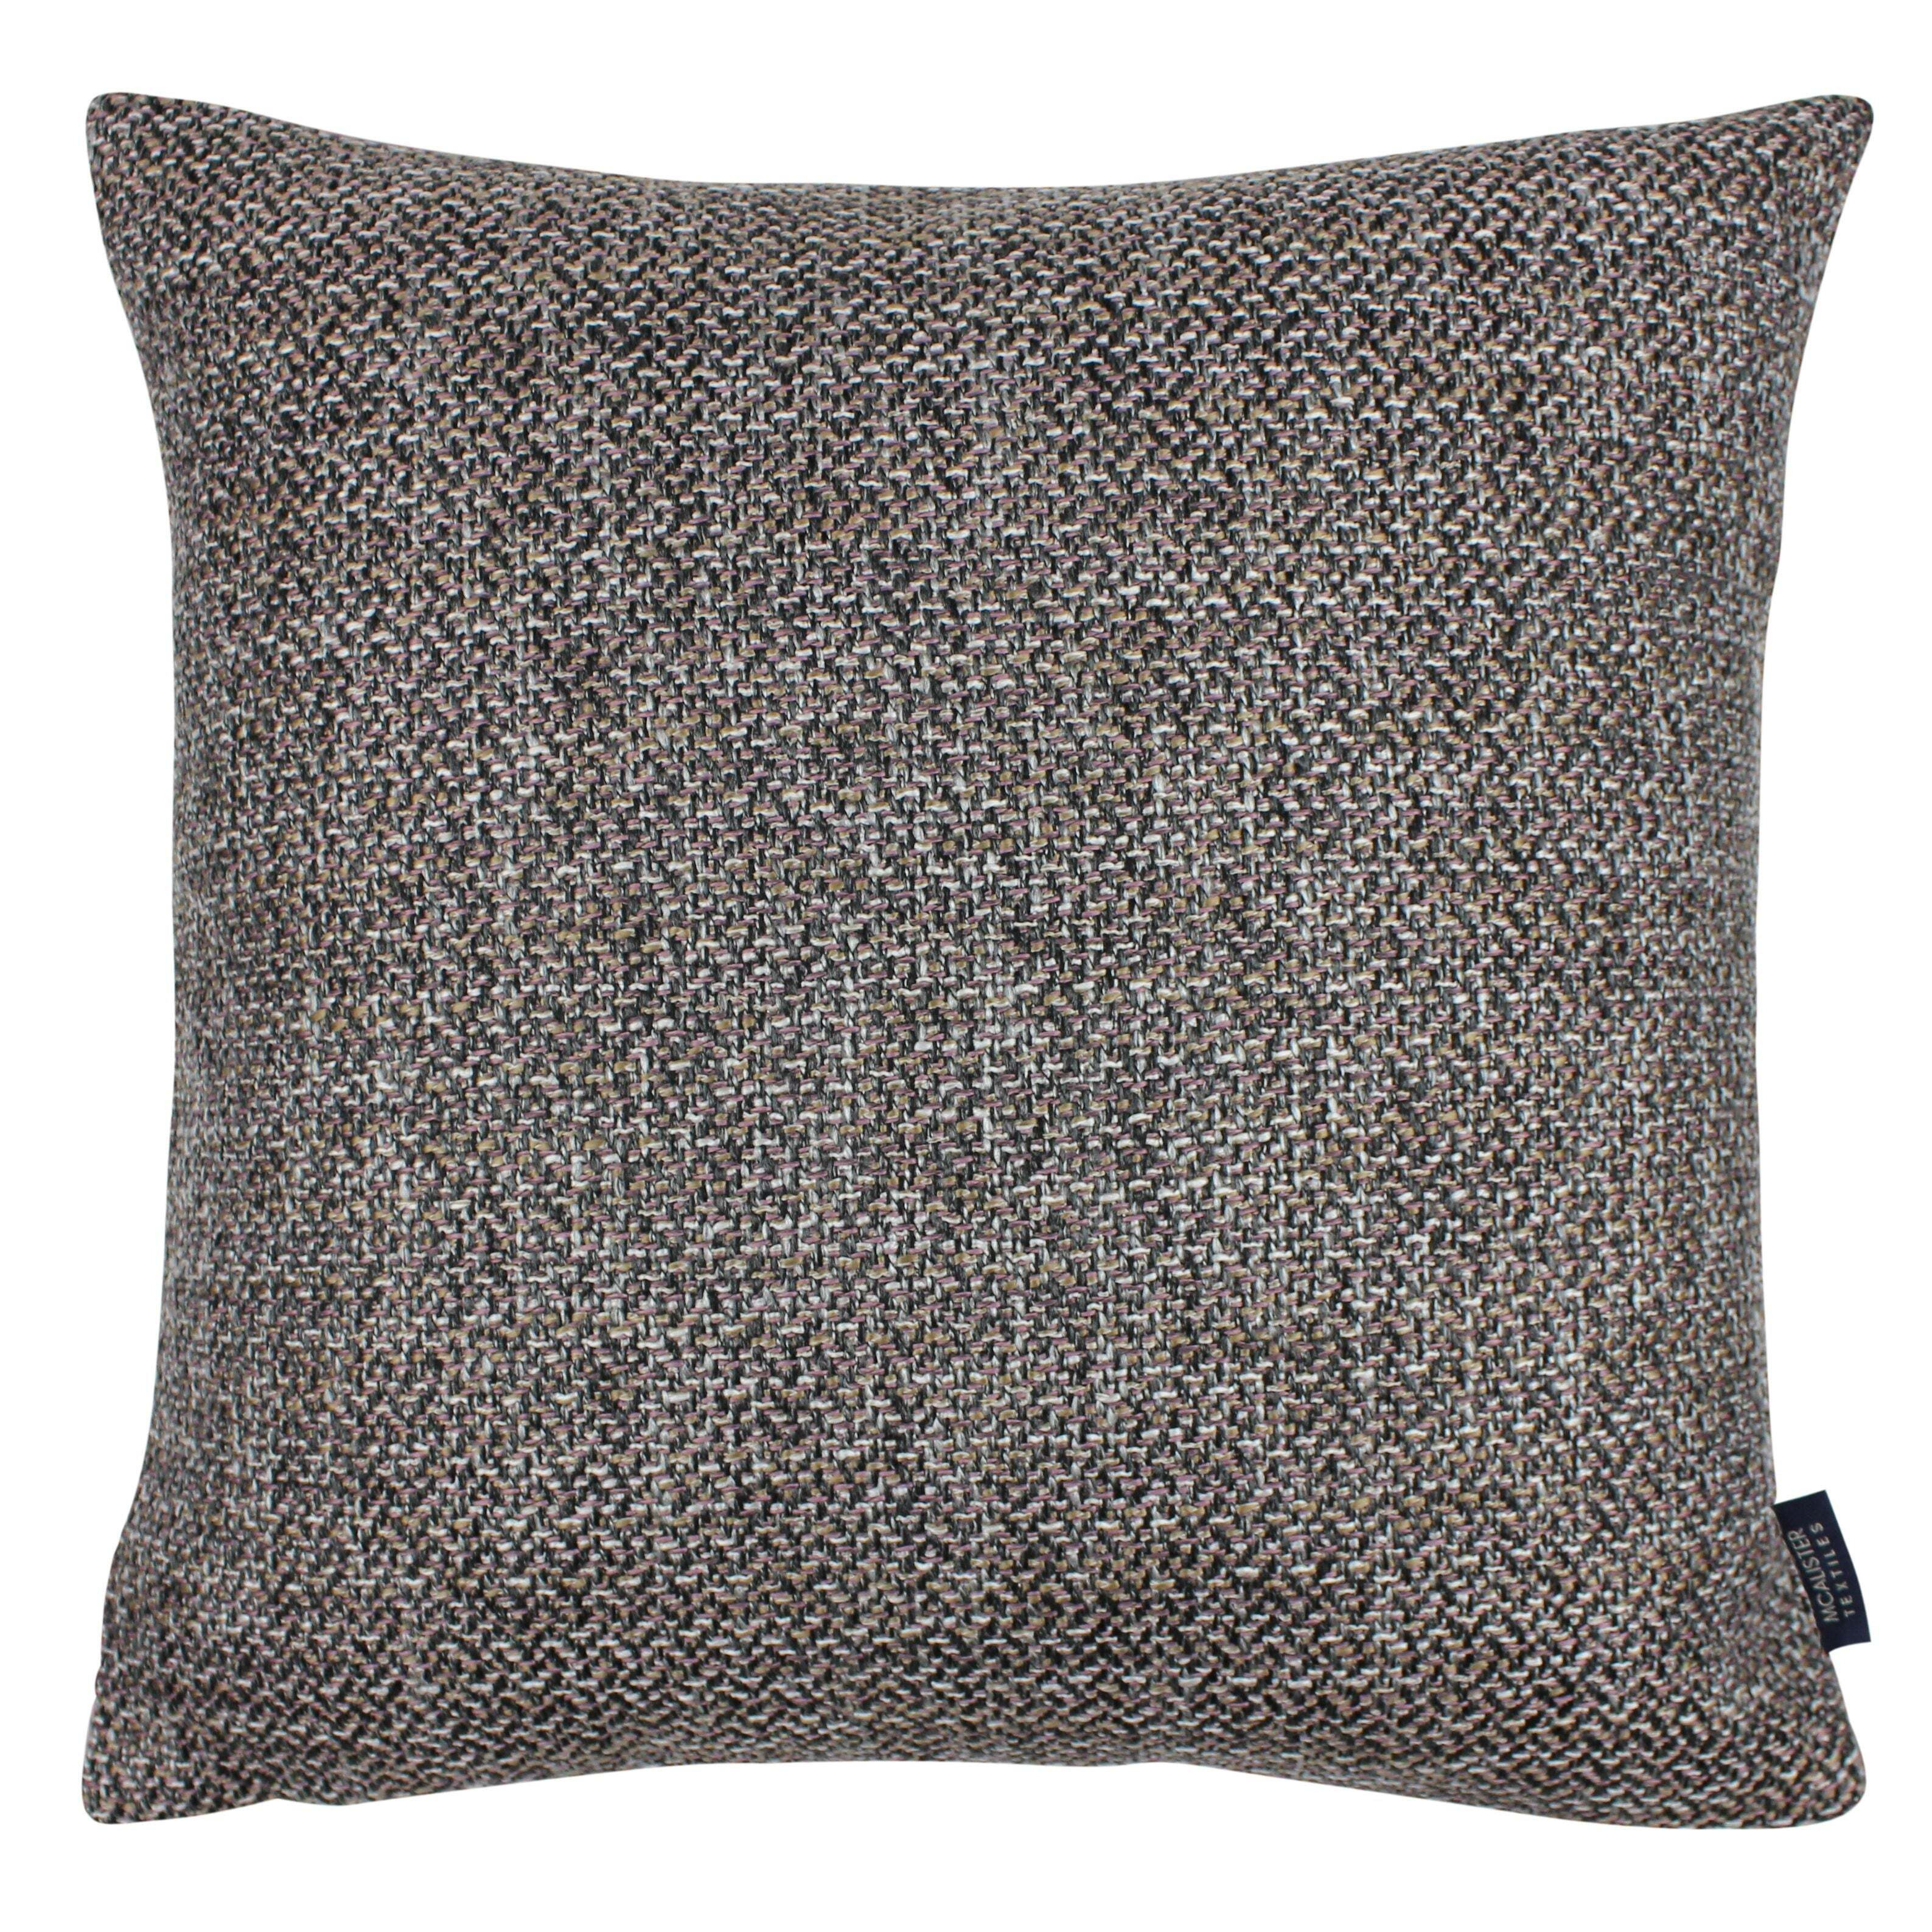 Lewis Tweed Cushion Grey Heather and Charcoal, Polyester Filler / 60cm x 60cm